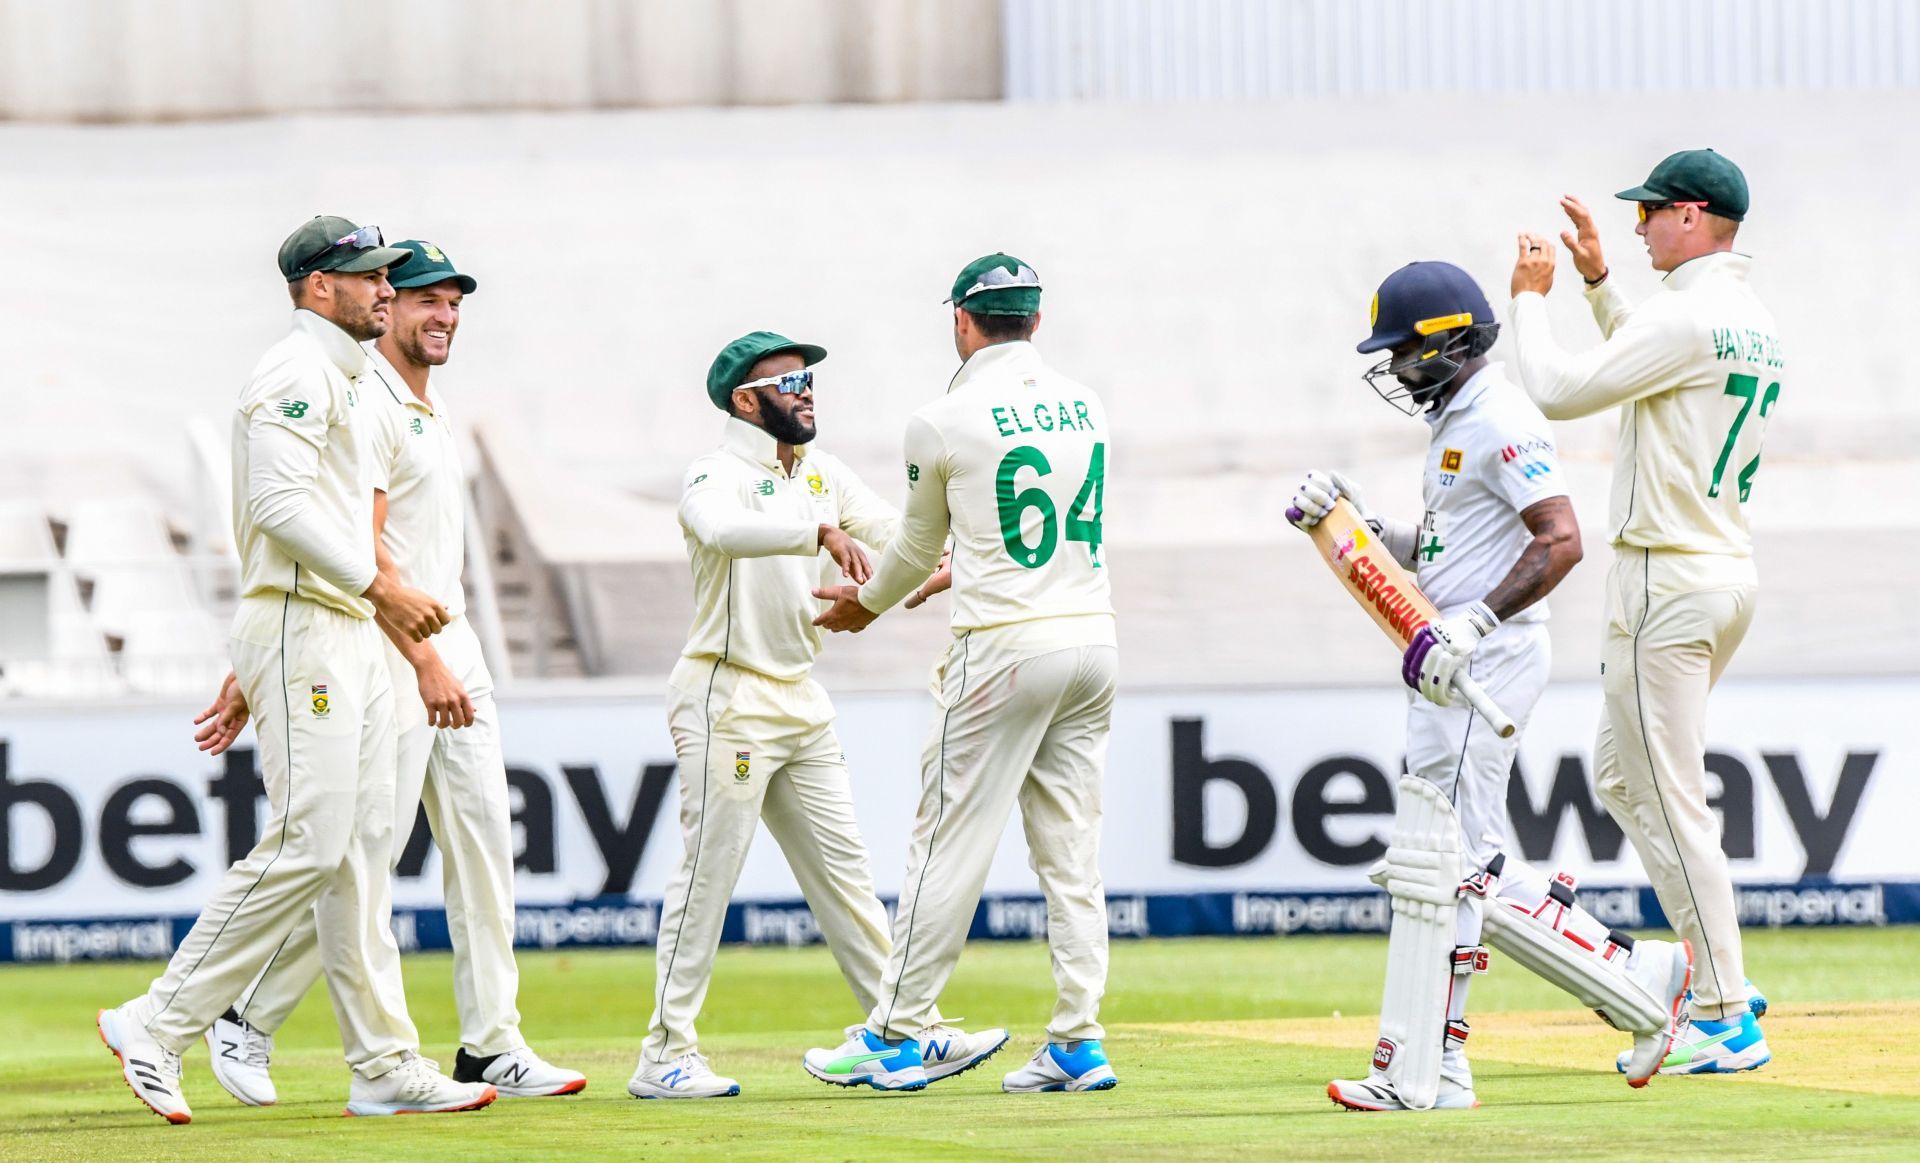 South Africa will tour New Zealand for a two-Test series in February 2022